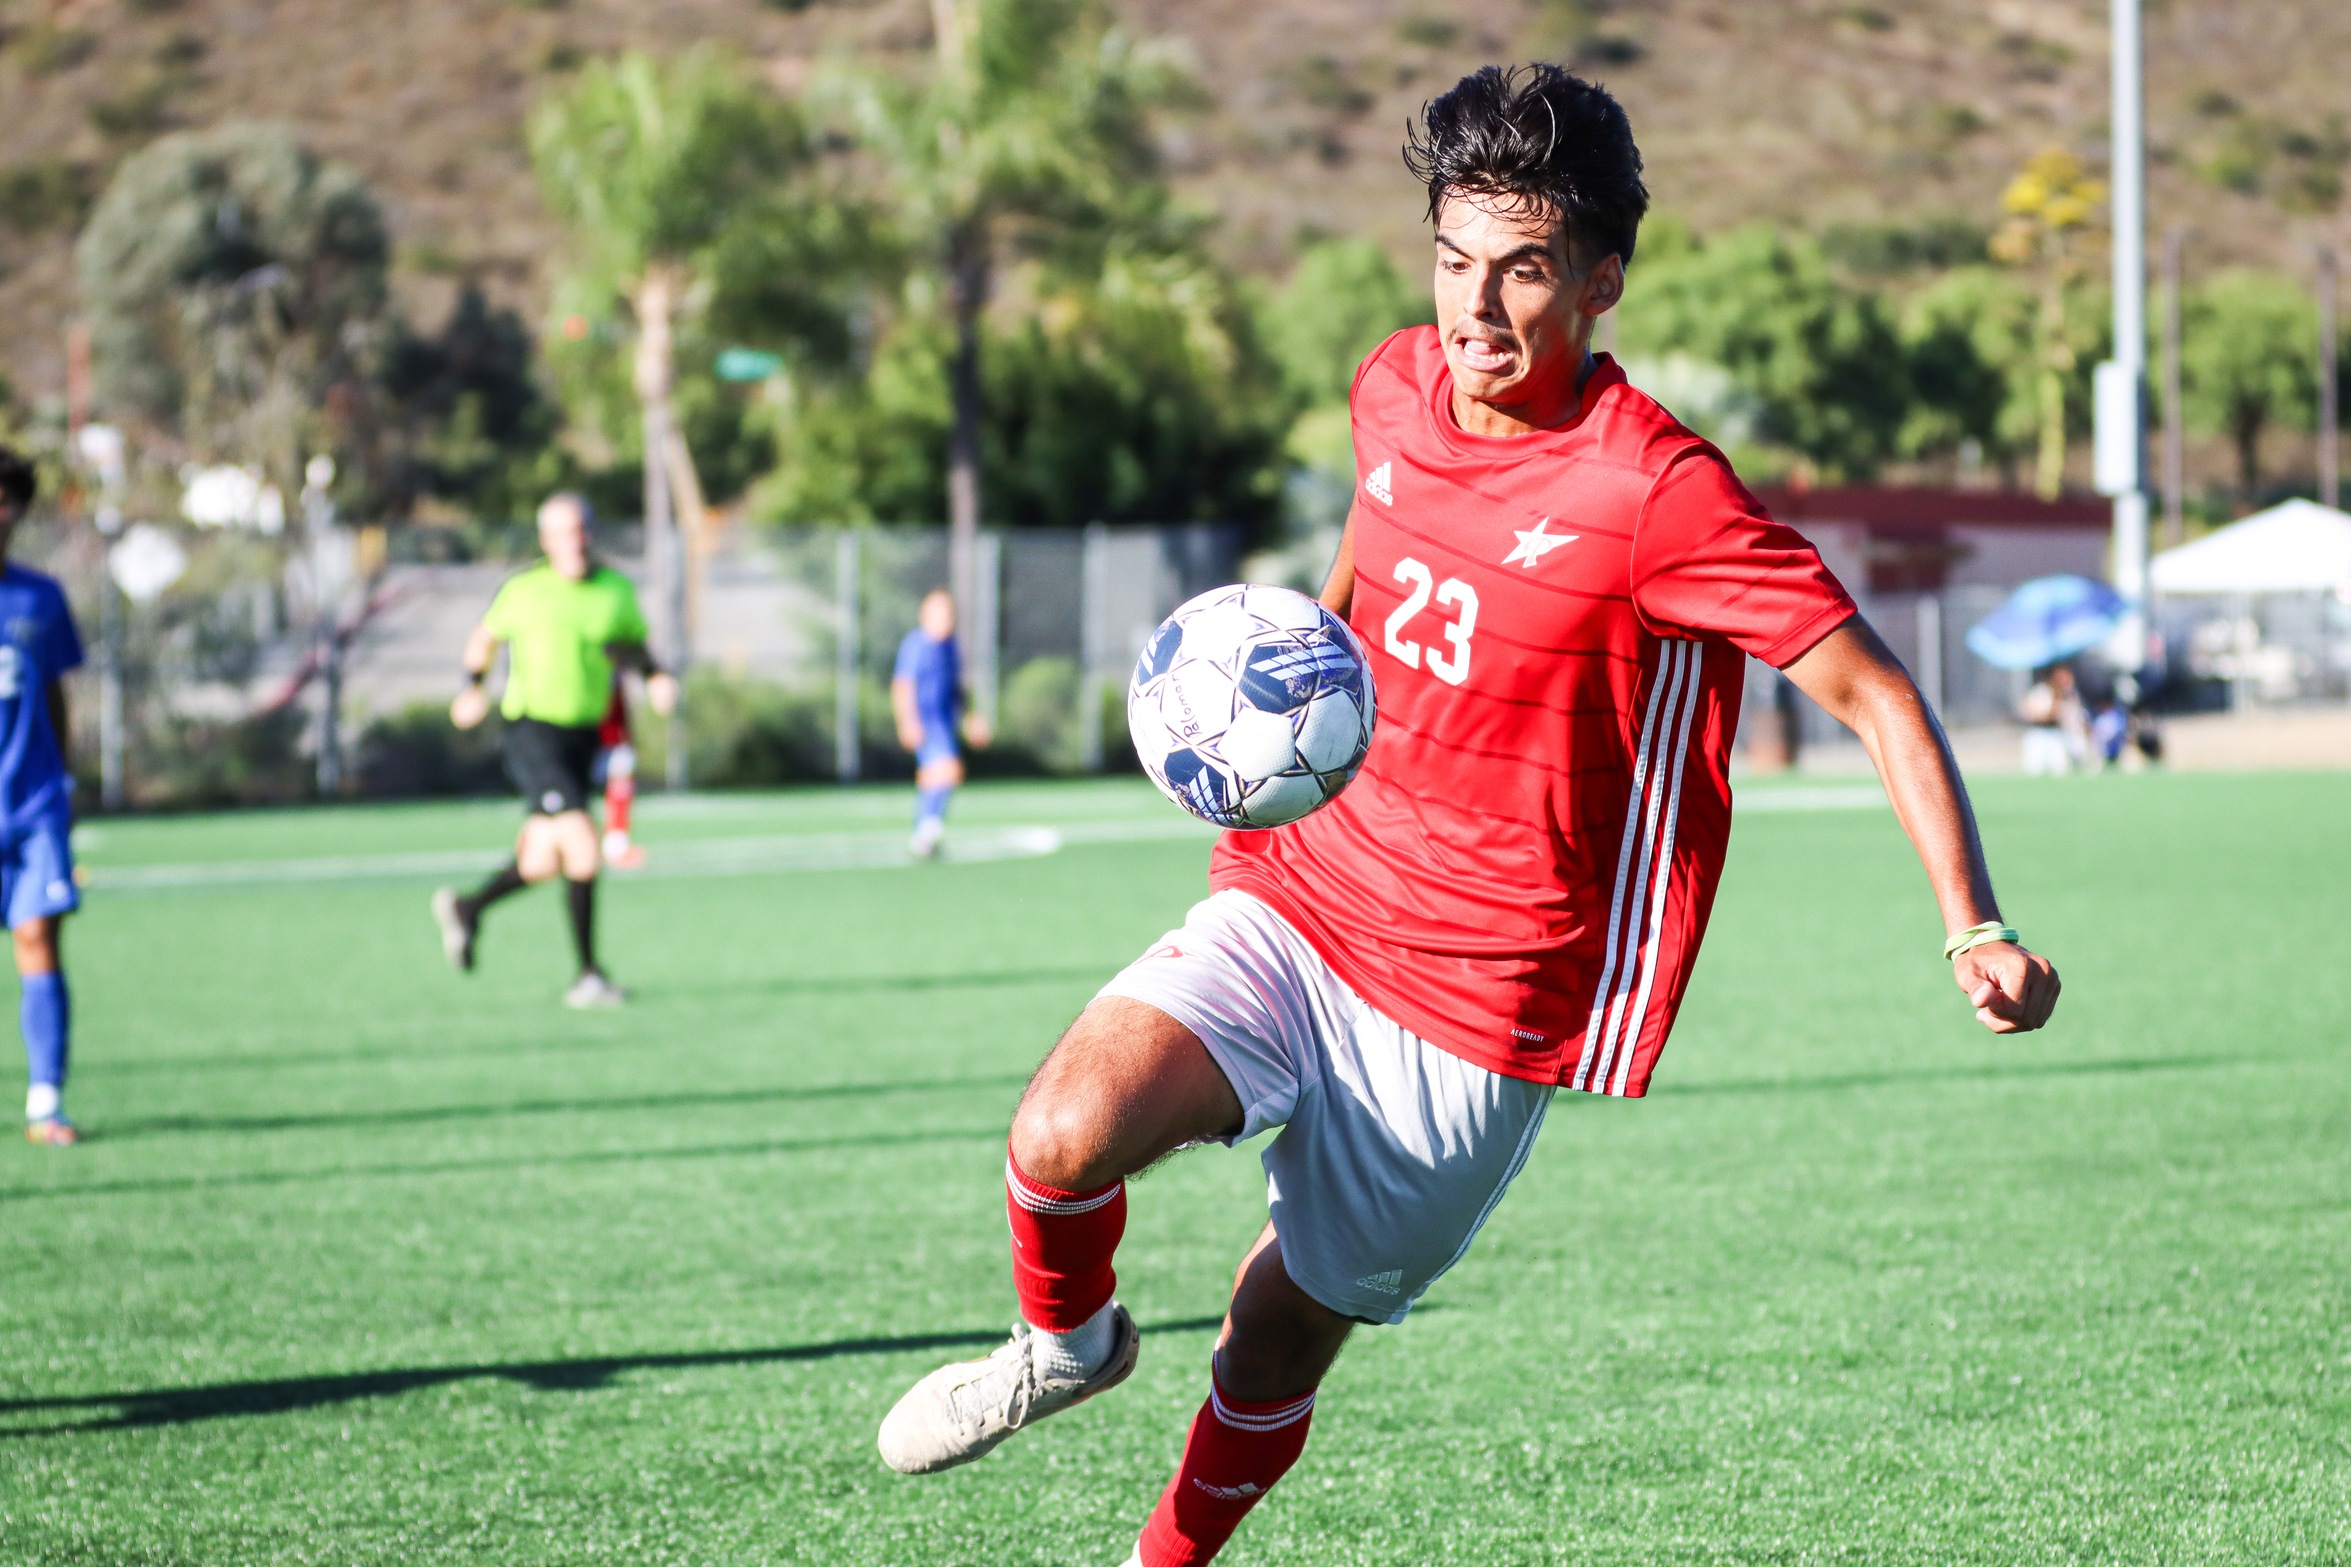 Arturo Atilano-Gutierrez had his first hat trick on Friday afternoon. Photo by Cara Heise.